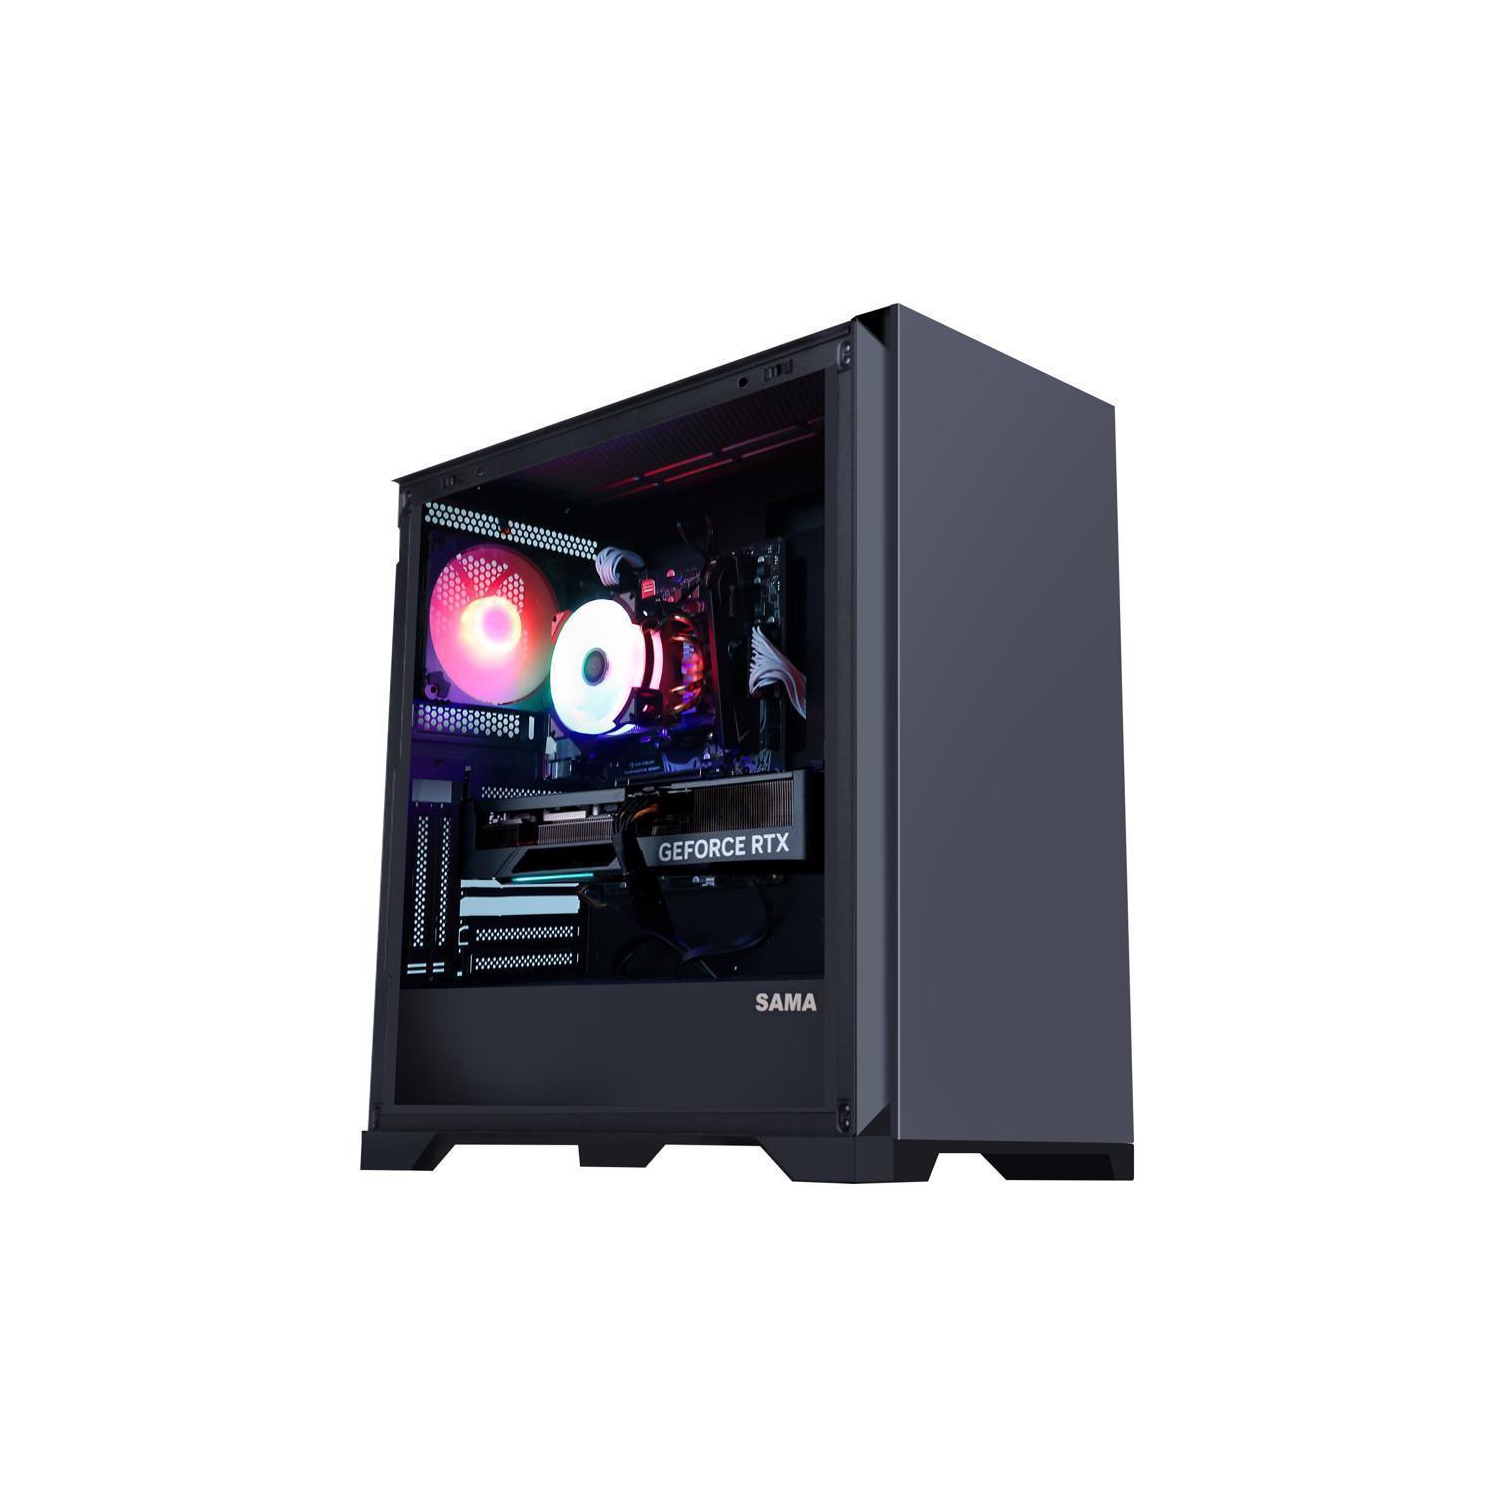 Hoengager Ares Gaming - Intel Core i5-12400F 6-Core 2.5 GHz- GeForce GTX 1650- 32GB DDR4 3200MHz - 500GB M.2 + 2TB 2.5'' SATA SSD- WIFI -RGB Fans - Windows 11 Pro Computer